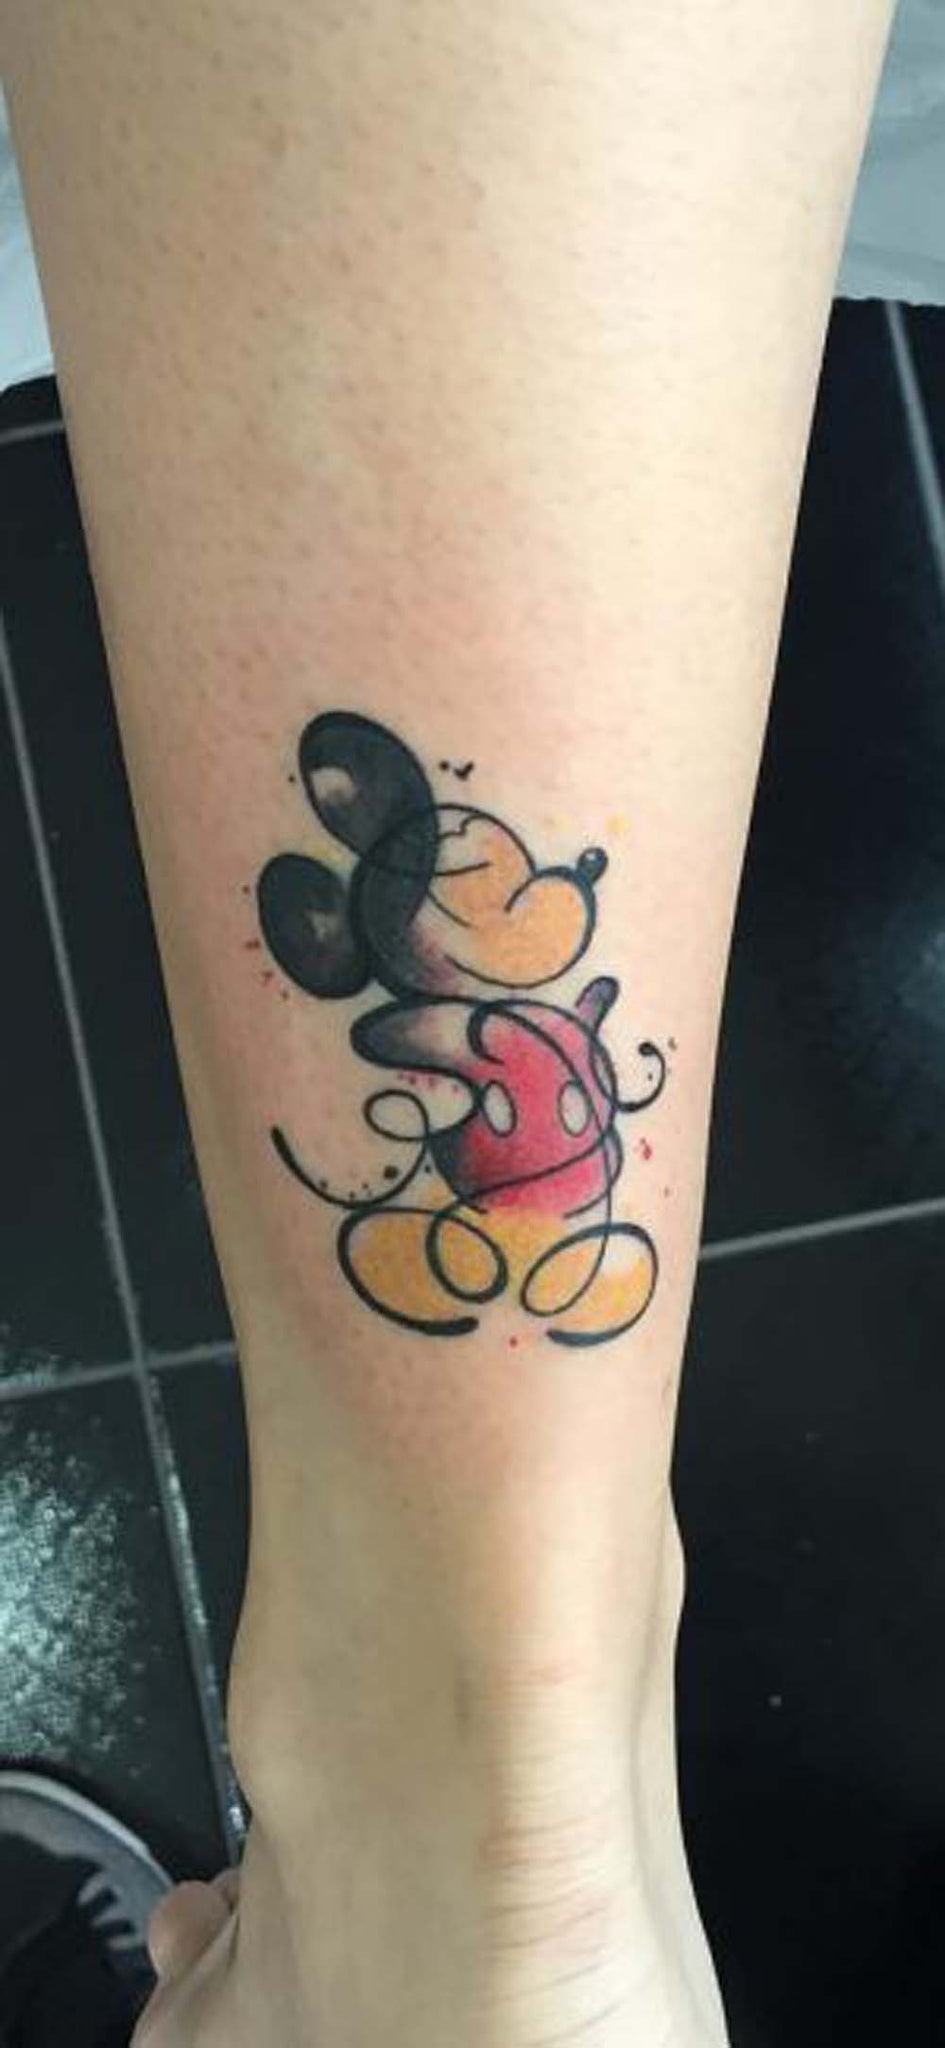 Cute Small Minimal Watercolor Mickey Mouse Ankle Leg Calf Tattoo Ideas for Women - www.MyBodiArt.com